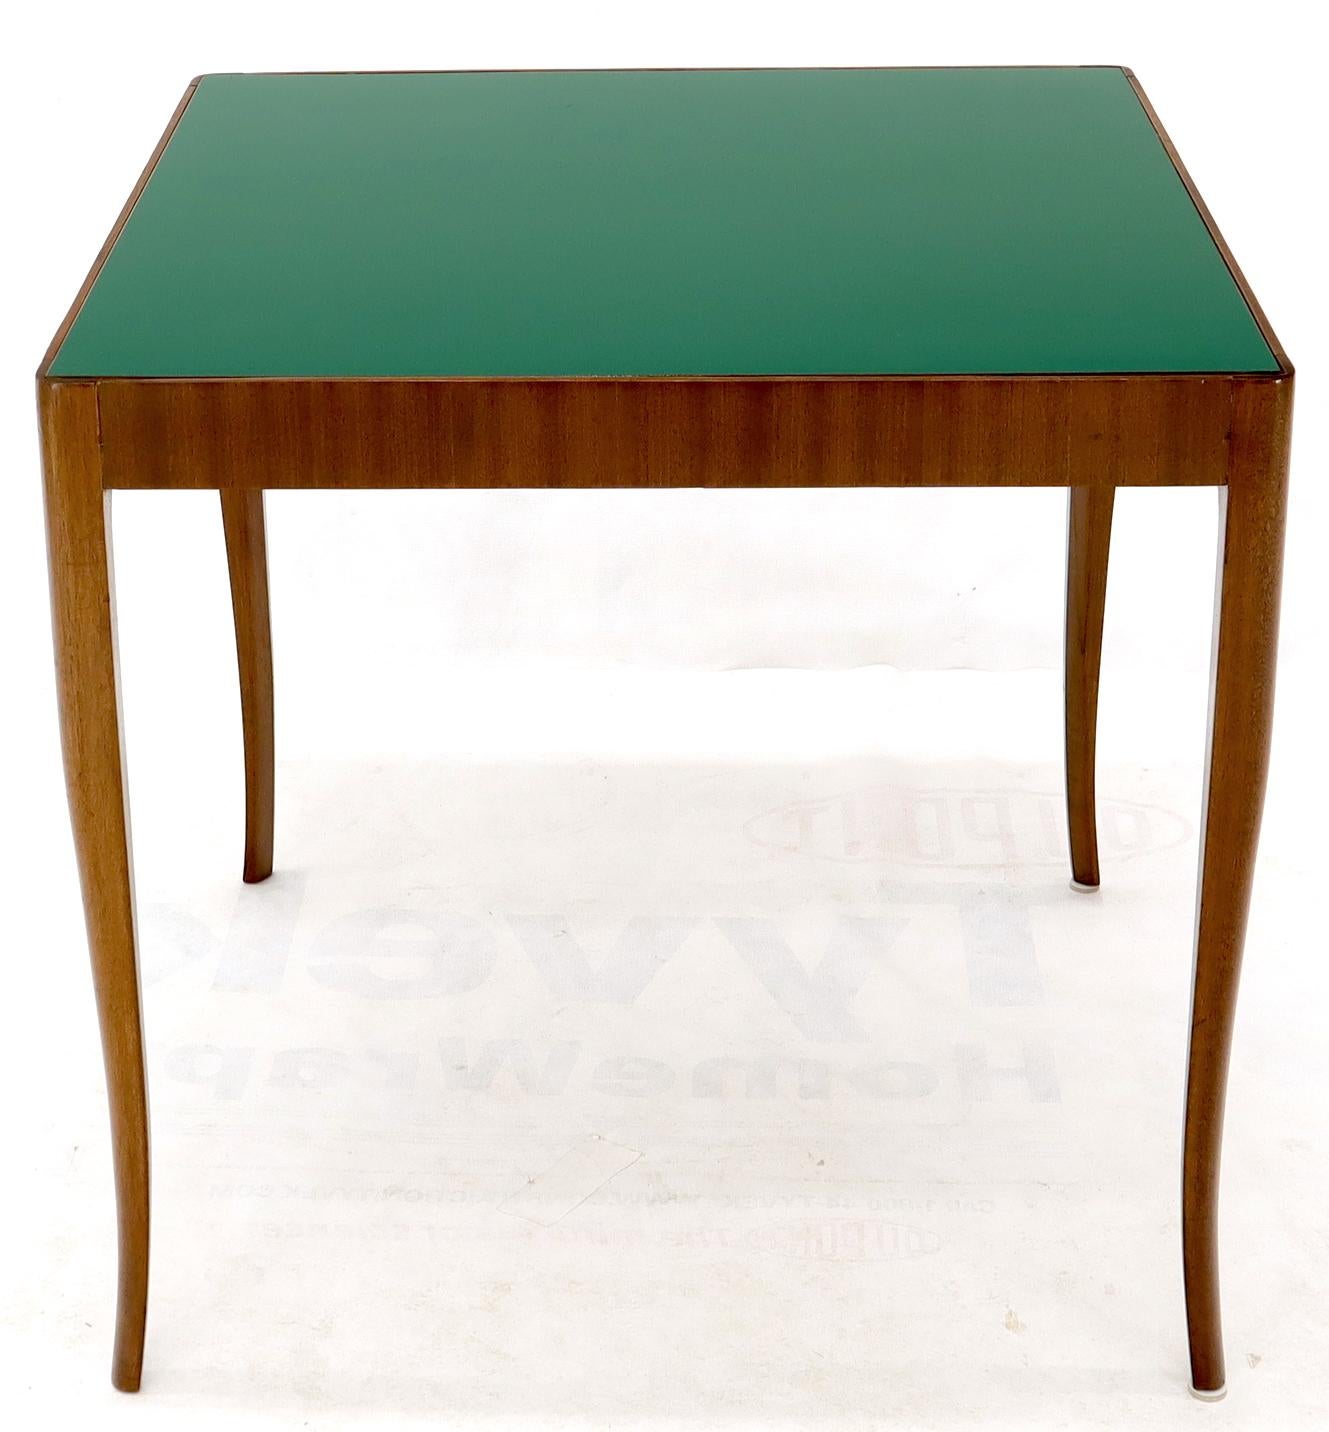 Low profile Mid-Century Modern walnut game or small dining table with laminate top.